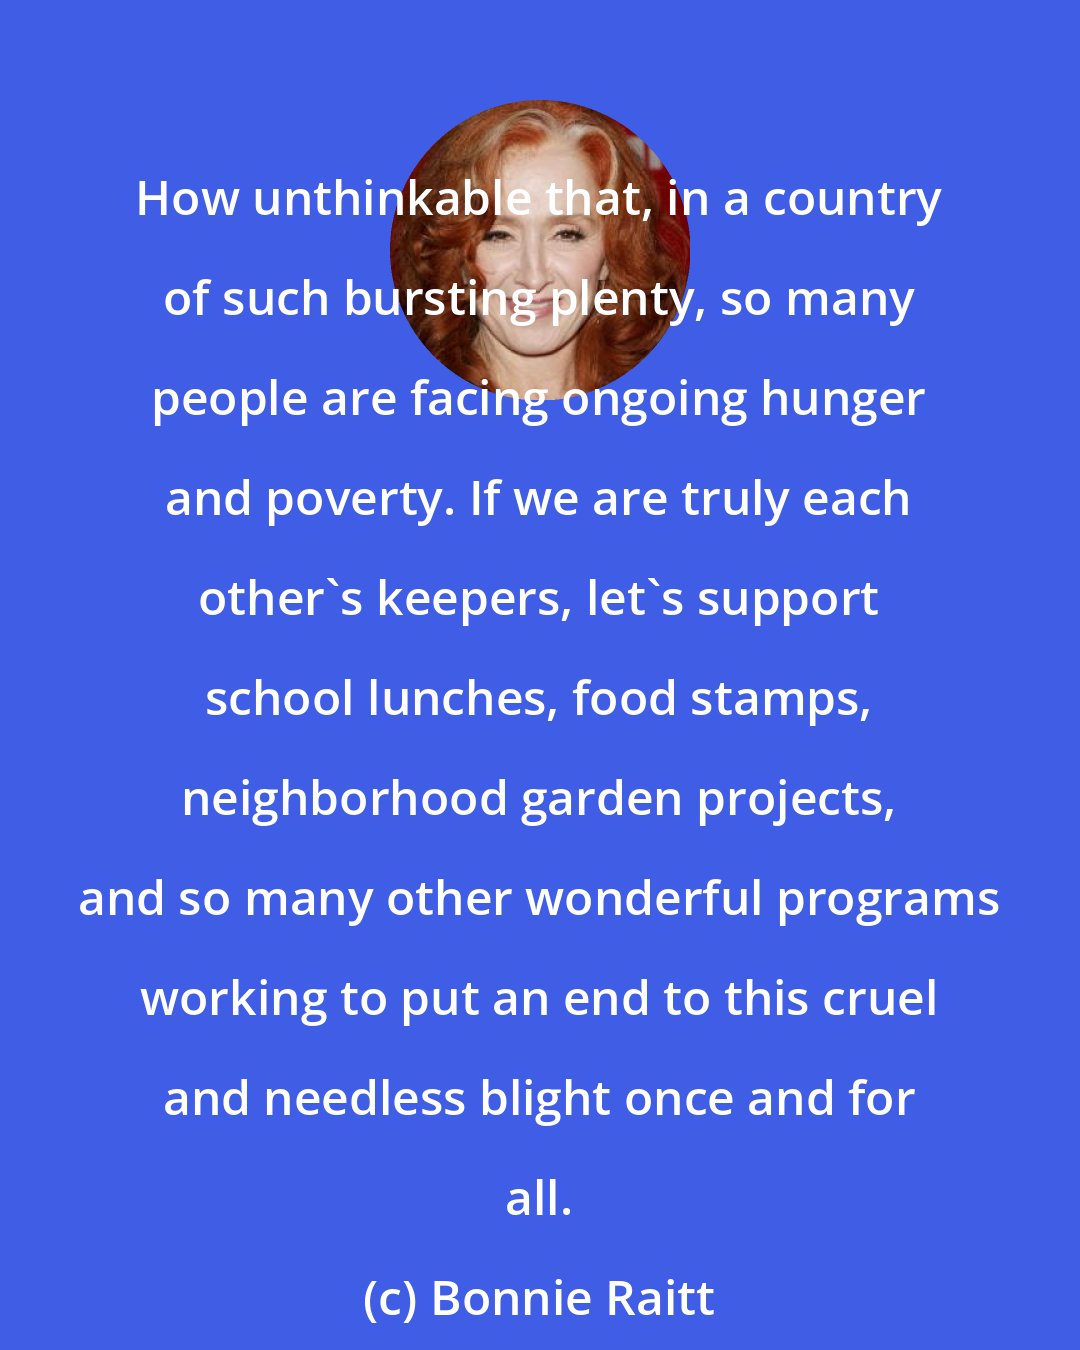 Bonnie Raitt: How unthinkable that, in a country of such bursting plenty, so many people are facing ongoing hunger and poverty. If we are truly each other's keepers, let's support school lunches, food stamps, neighborhood garden projects, and so many other wonderful programs working to put an end to this cruel and needless blight once and for all.